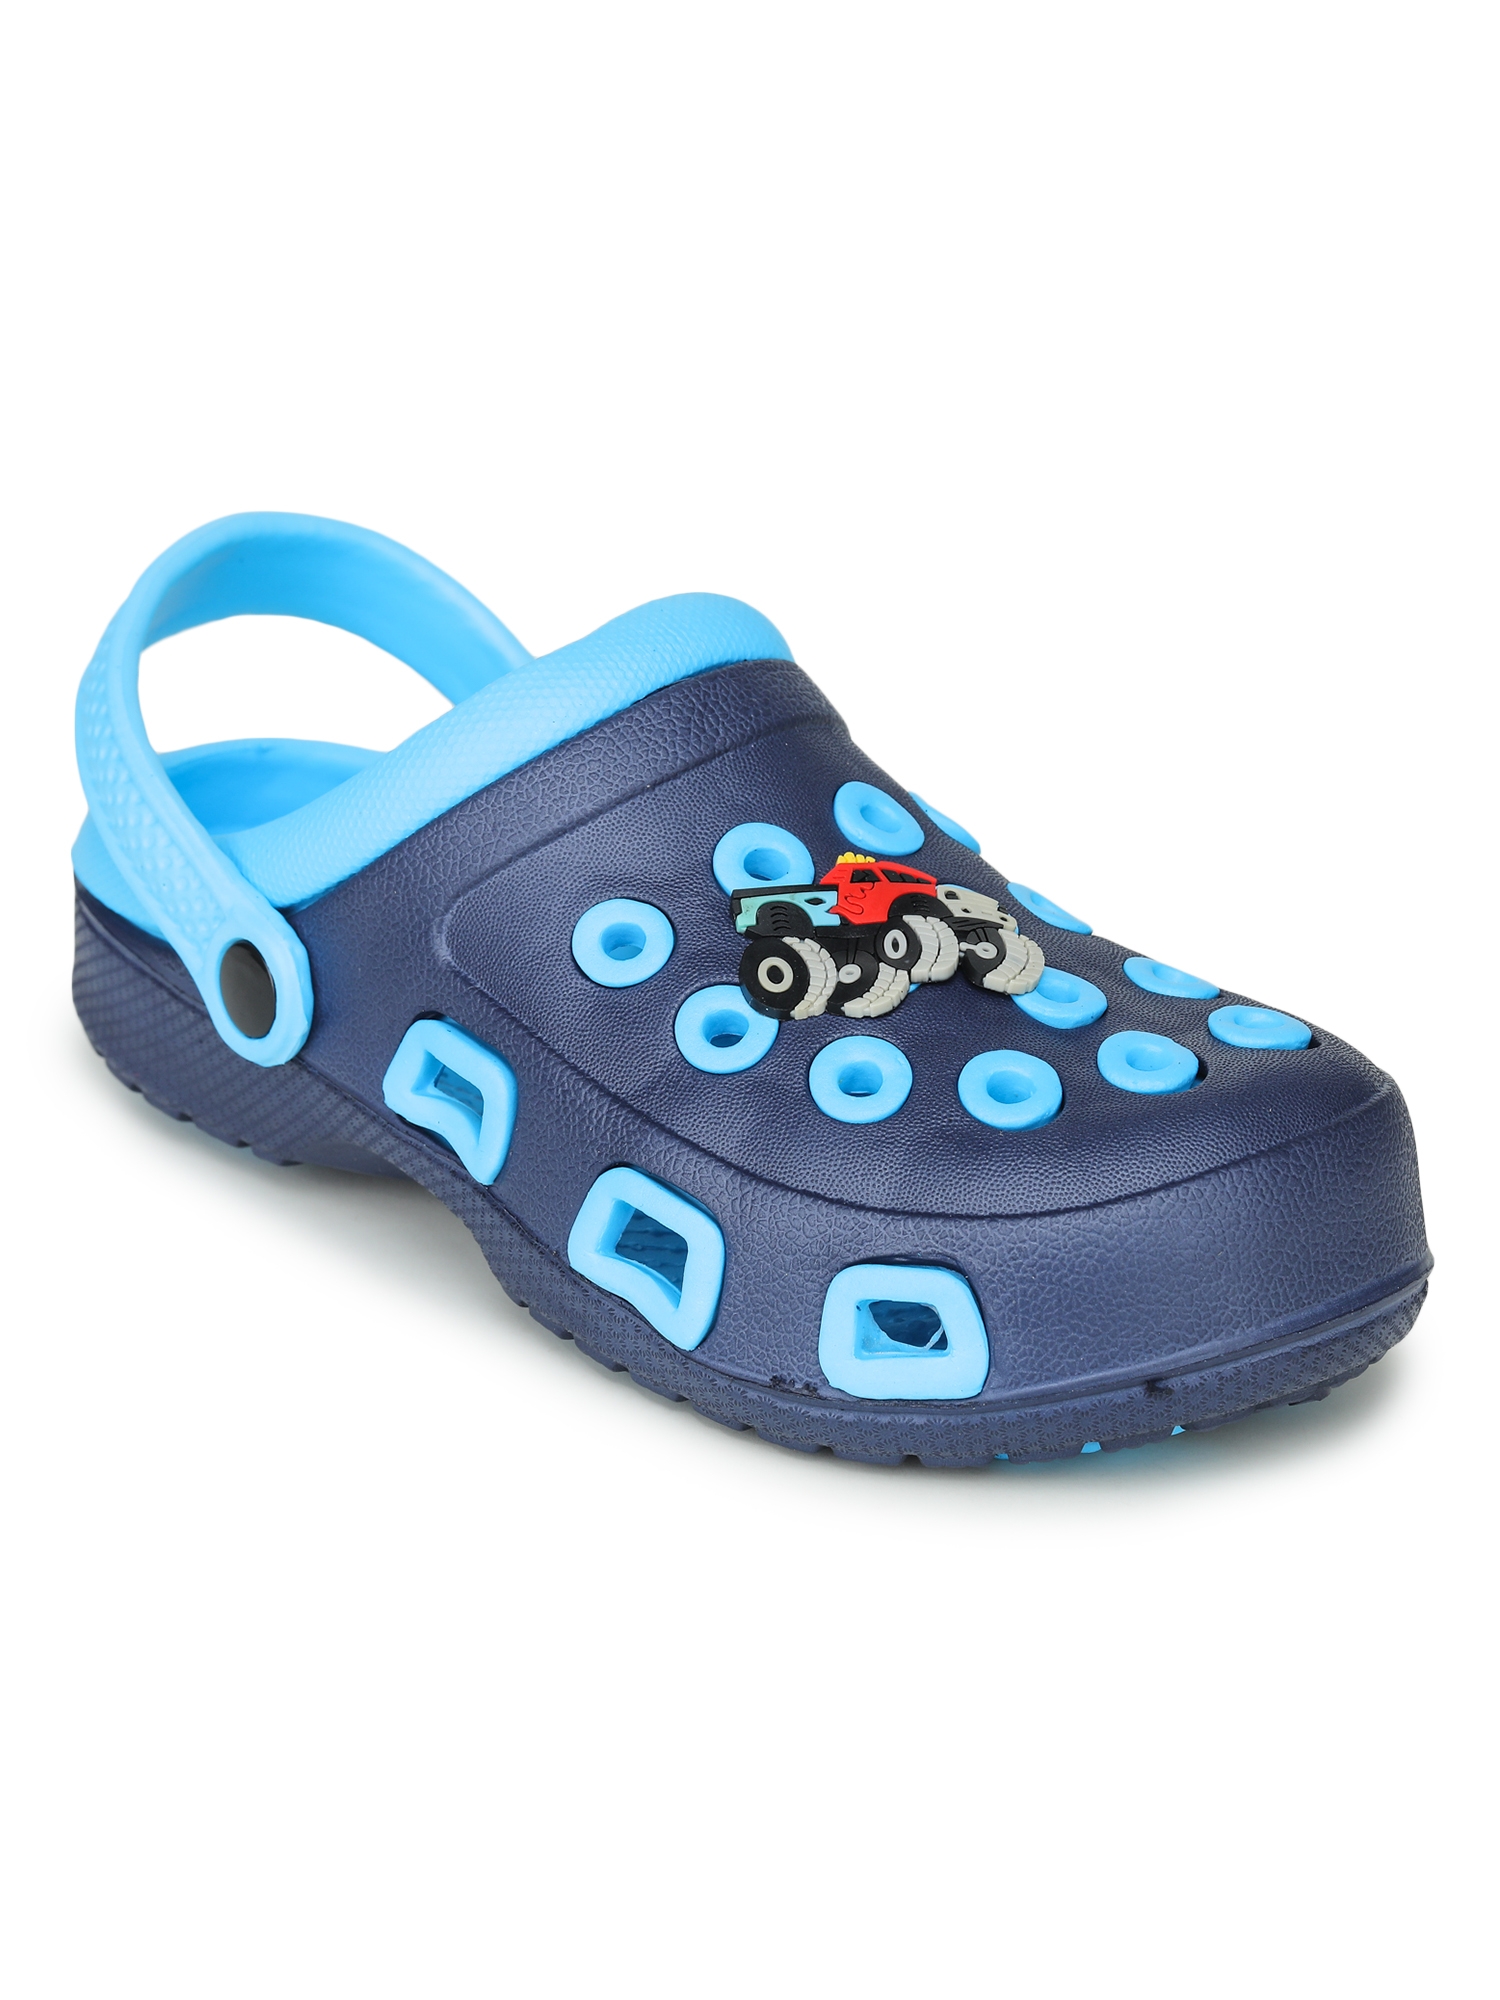 EASY TO GO LIGHT WEIGHT NAVYBLUE CLOGS FOR BOYS & GIRLS 